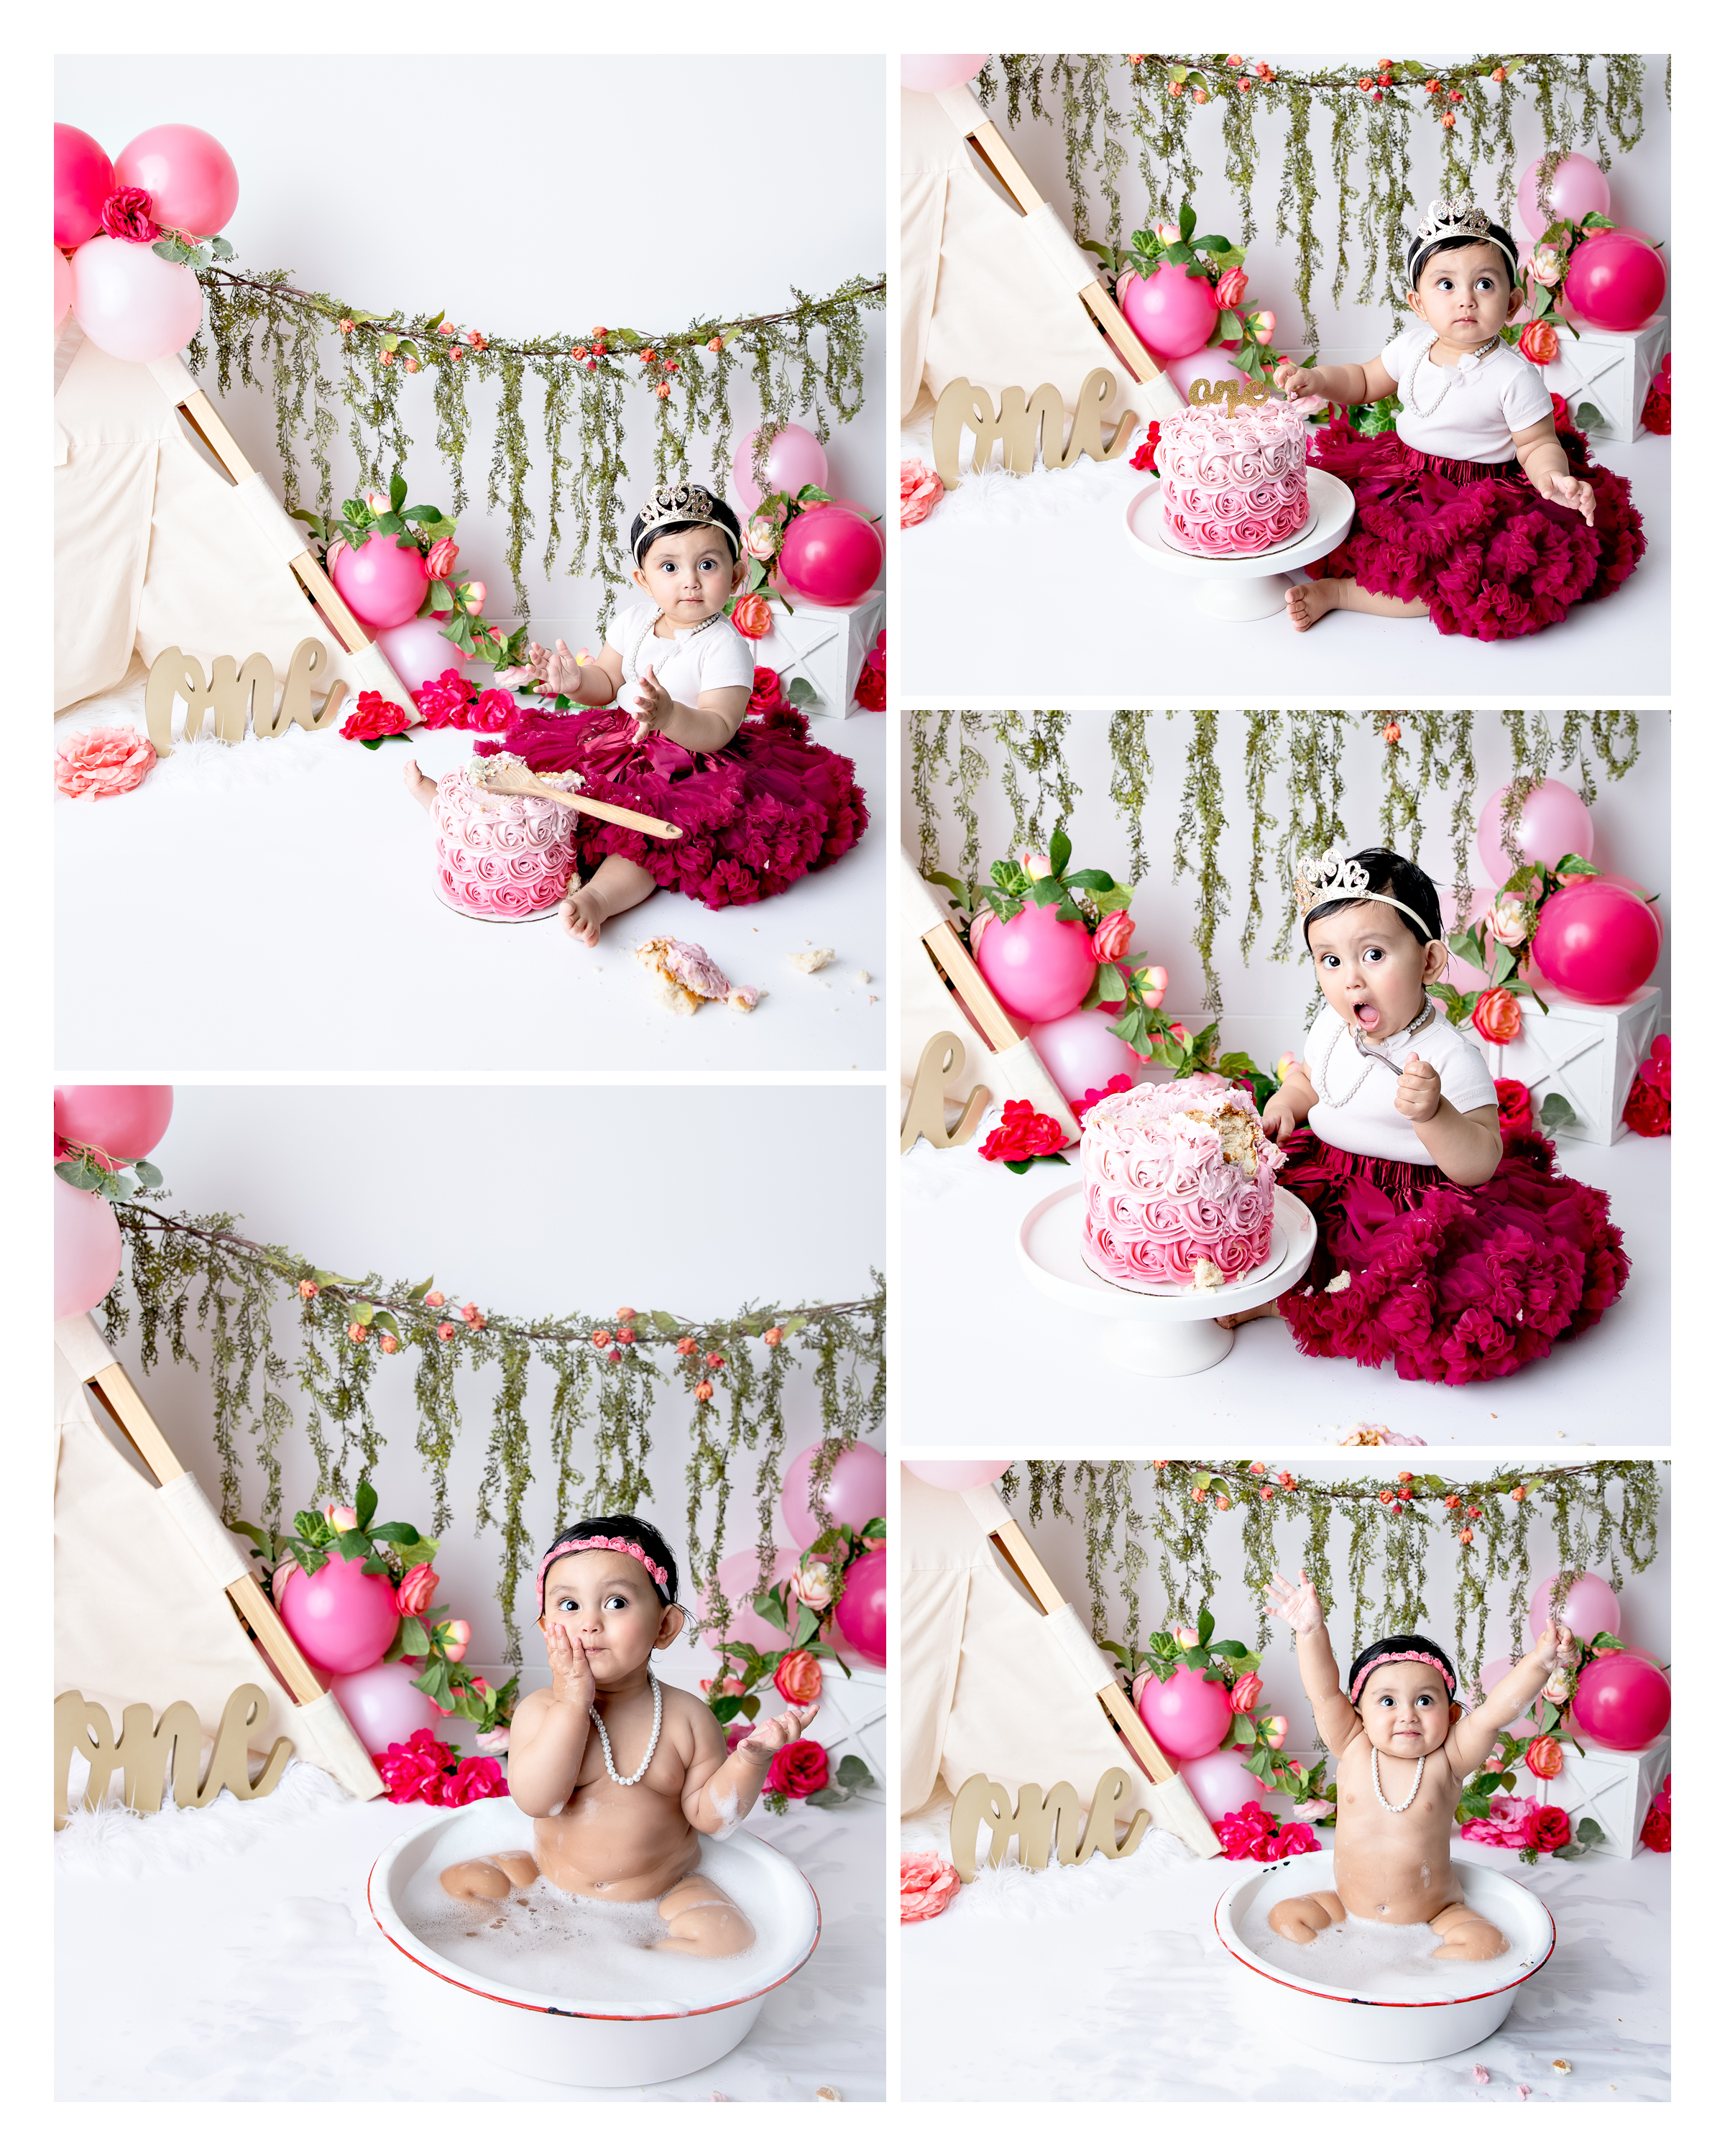 photos from a Cake Smash Session with Kristin Tiffany Photography